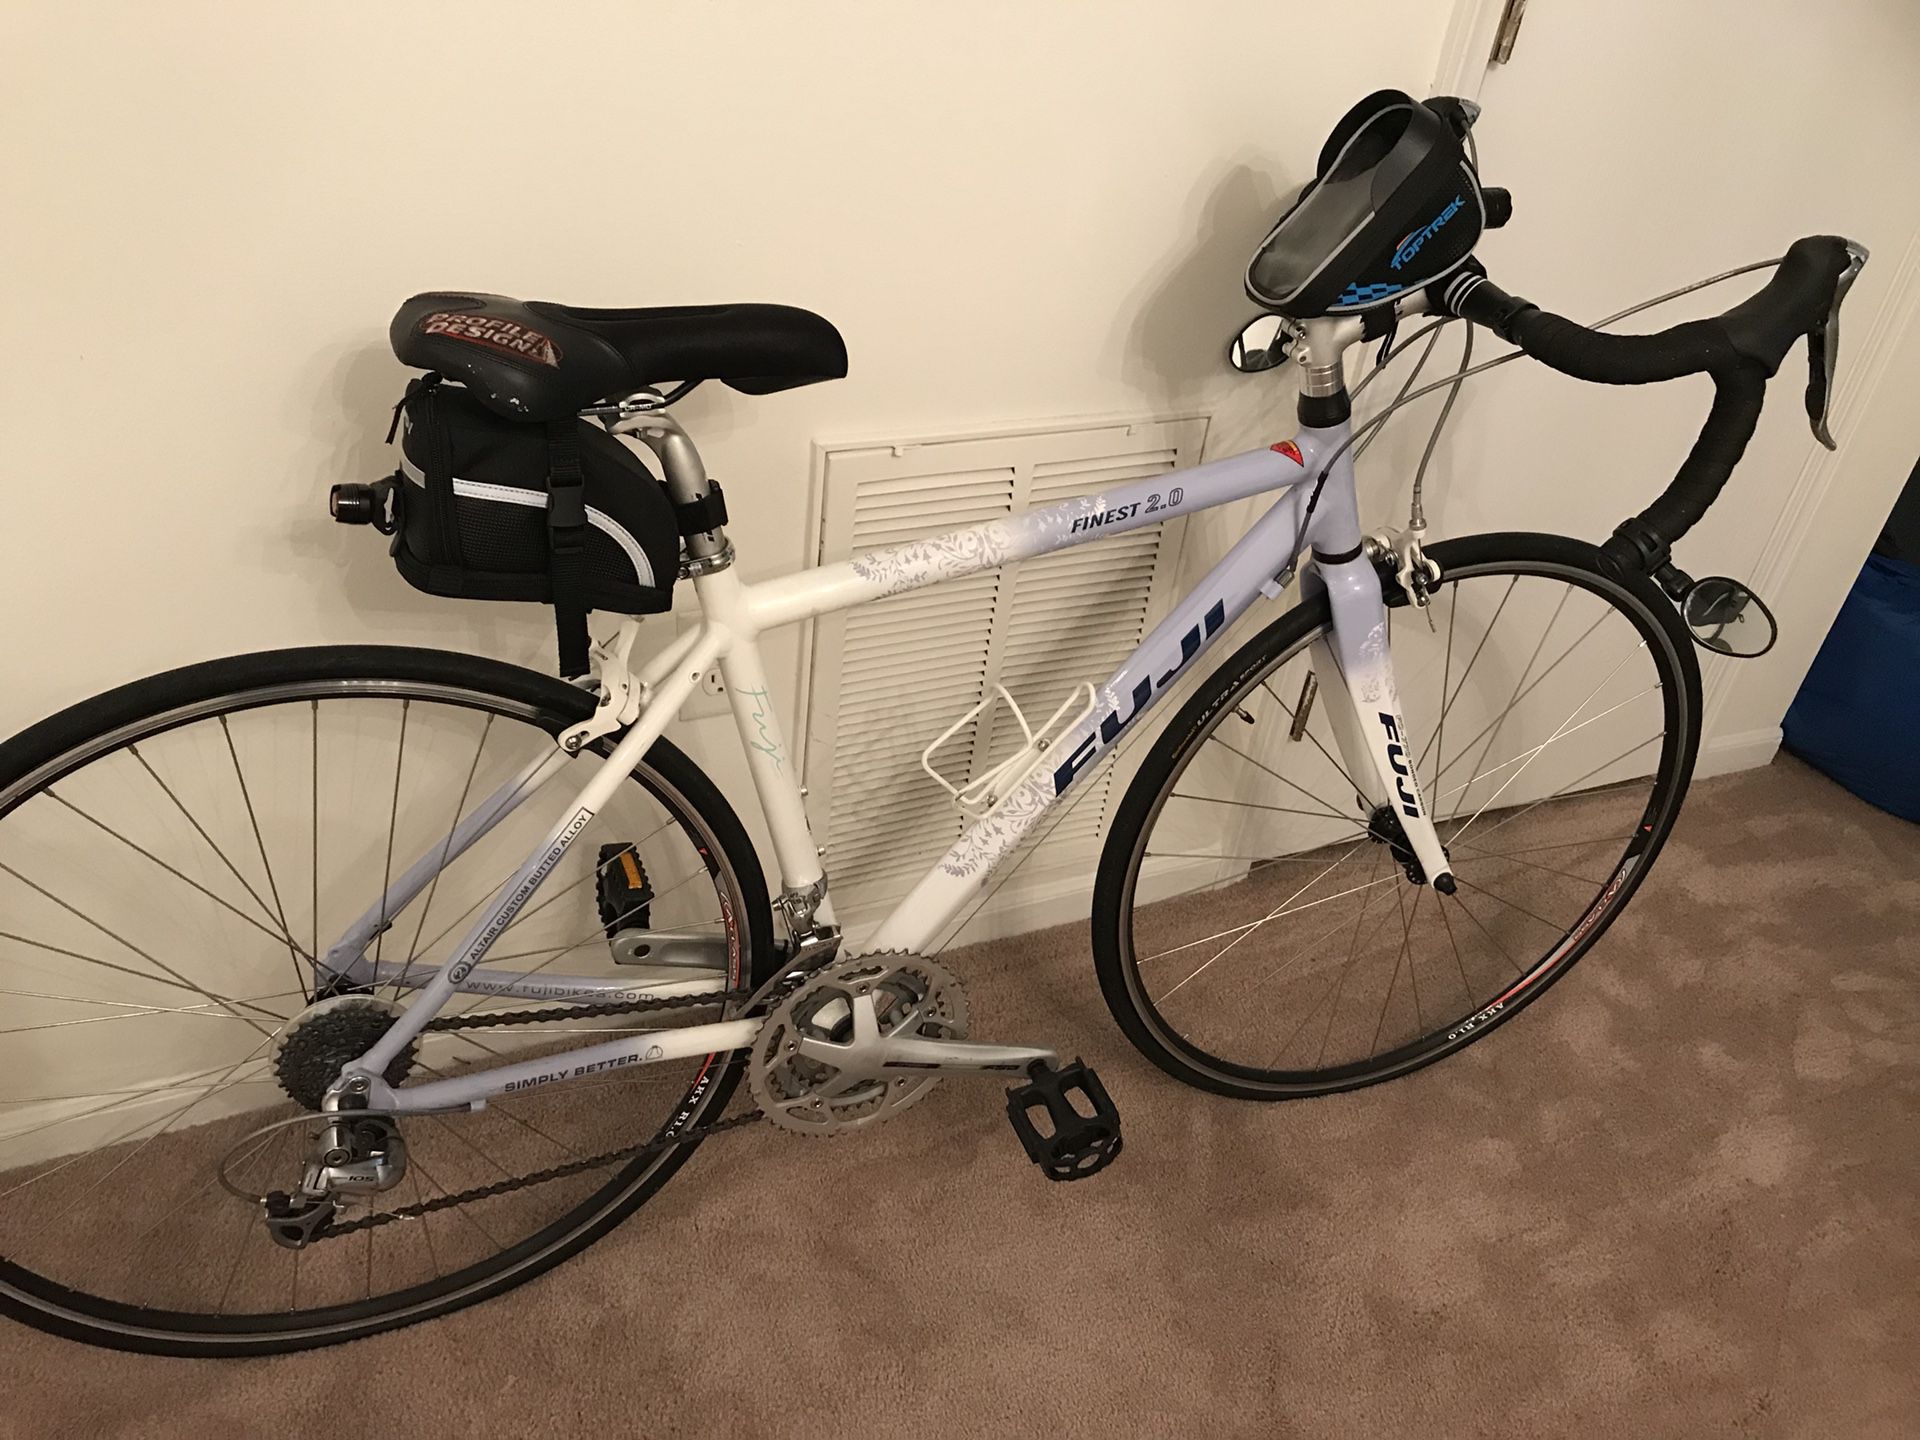 Fuji Finest 2.0, Small 47 CM, Unisex, FC-770 Bonded Carbon, Shimano 105 Sale in Dayton, OH - OfferUp